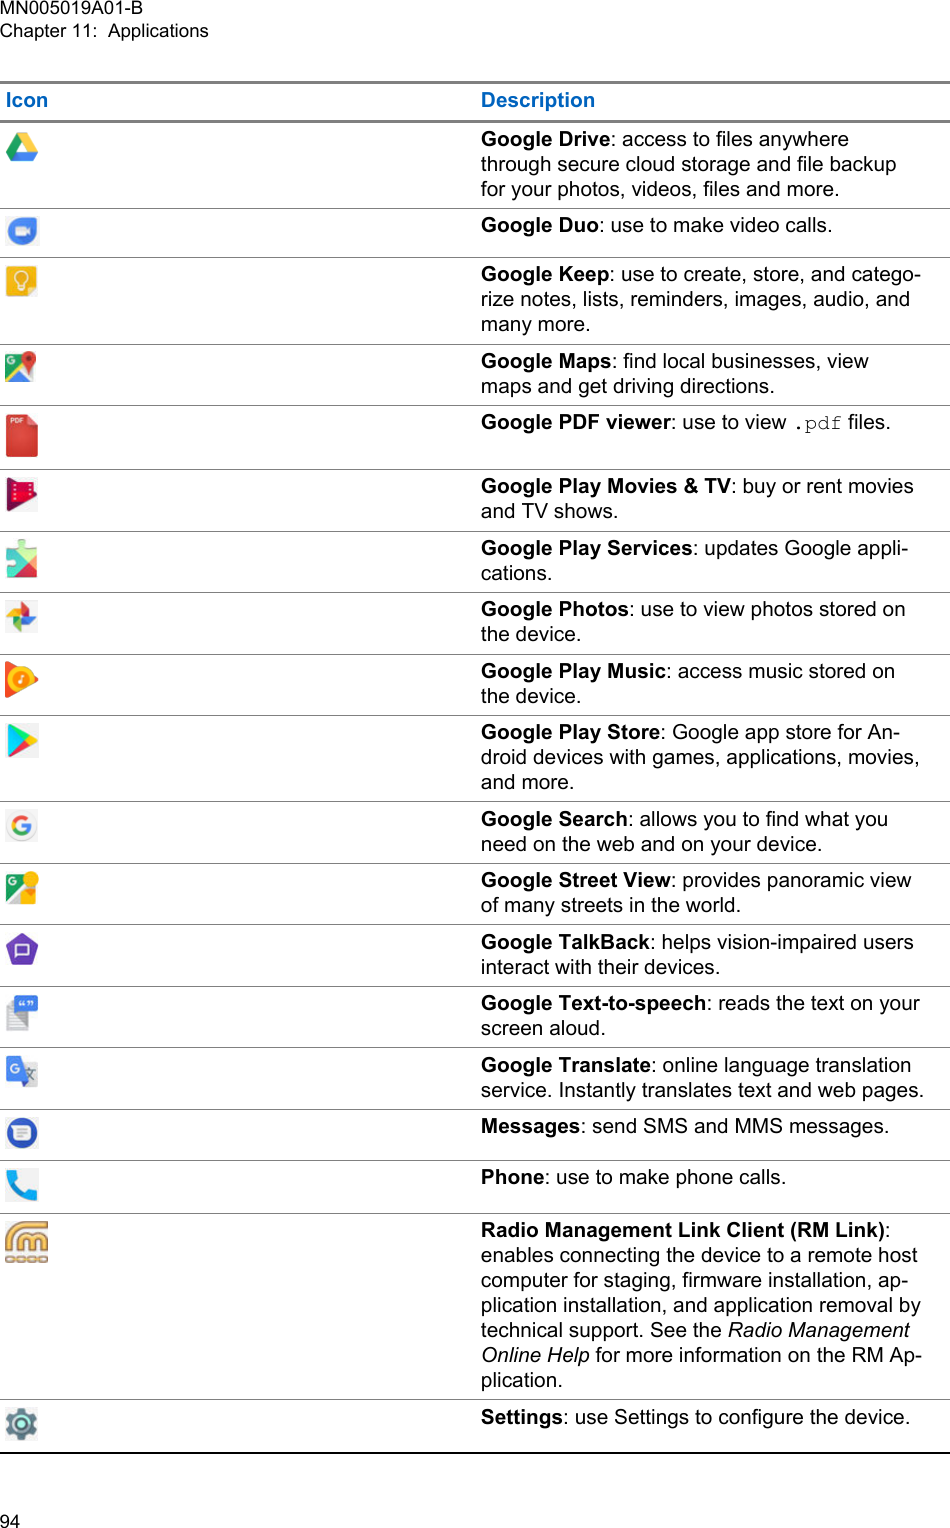 Icon DescriptionGoogle Drive: access to files anywherethrough secure cloud storage and file backupfor your photos, videos, files and more.Google Duo: use to make video calls.Google Keep: use to create, store, and catego-rize notes, lists, reminders, images, audio, andmany more.Google Maps: find local businesses, viewmaps and get driving directions.Google PDF viewer: use to view .pdf files.Google Play Movies &amp; TV: buy or rent moviesand TV shows.Google Play Services: updates Google appli-cations.Google Photos: use to view photos stored onthe device.Google Play Music: access music stored onthe device.Google Play Store: Google app store for An-droid devices with games, applications, movies,and more.Google Search: allows you to find what youneed on the web and on your device.Google Street View: provides panoramic viewof many streets in the world.Google TalkBack: helps vision-impaired usersinteract with their devices.Google Text-to-speech: reads the text on yourscreen aloud.Google Translate: online language translationservice. Instantly translates text and web pages.Messages: send SMS and MMS messages.Phone: use to make phone calls.Radio Management Link Client (RM Link):enables connecting the device to a remote hostcomputer for staging, firmware installation, ap-plication installation, and application removal bytechnical support. See the Radio ManagementOnline Help for more information on the RM Ap-plication.Settings: use Settings to configure the device.MN005019A01-BChapter 11:  Applications94  